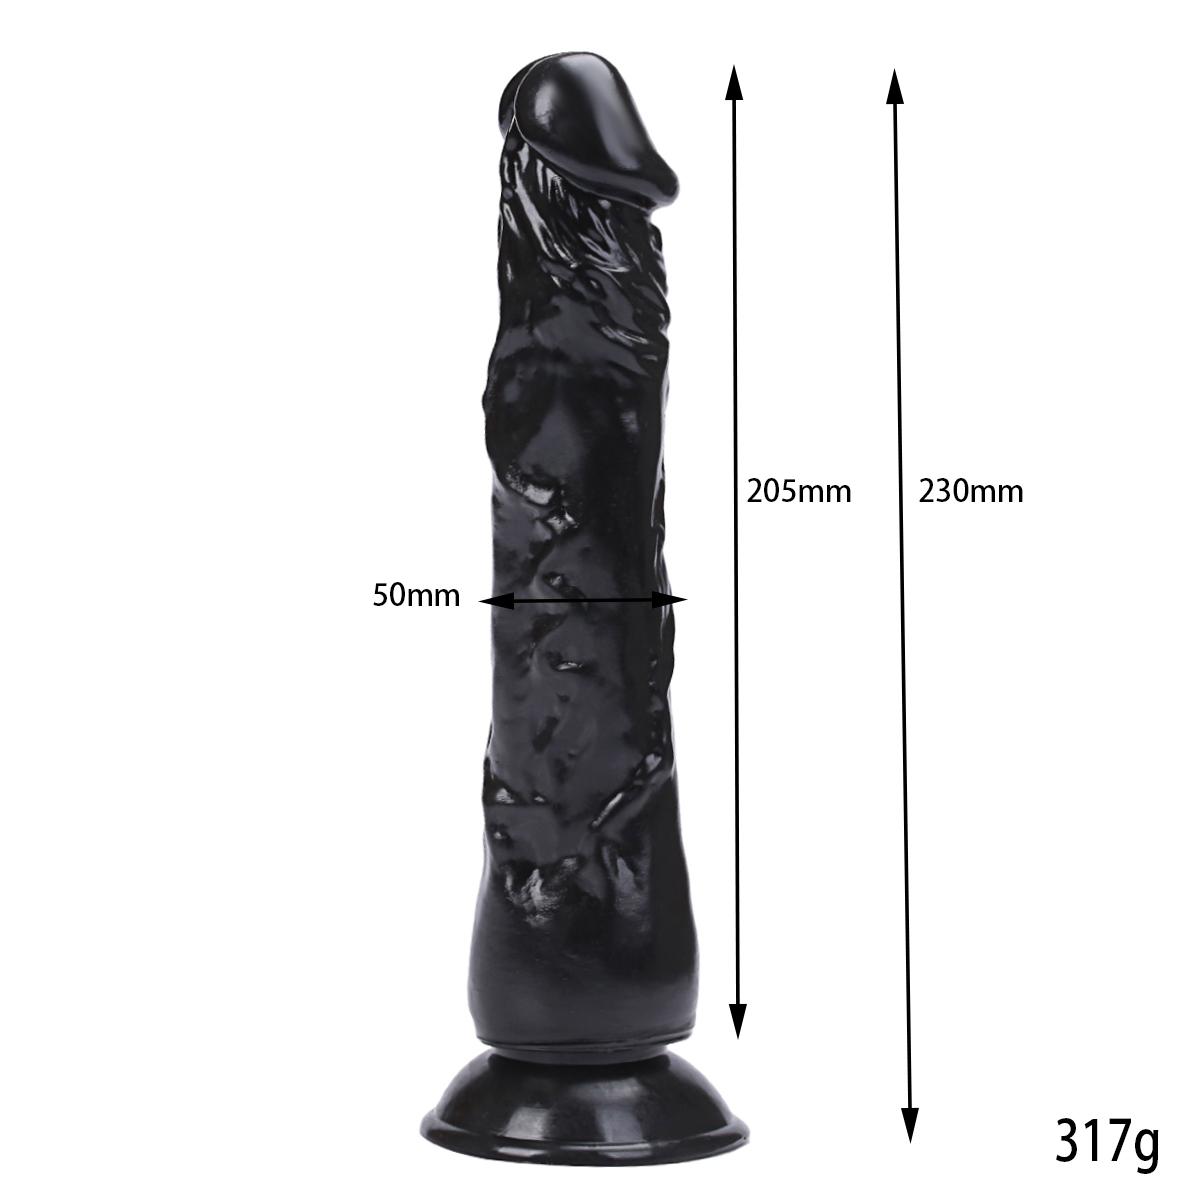 Multicolor simulation small penis for women, masturbation and flirtation suction cups, fake penis, adult sex toy dildo wl254